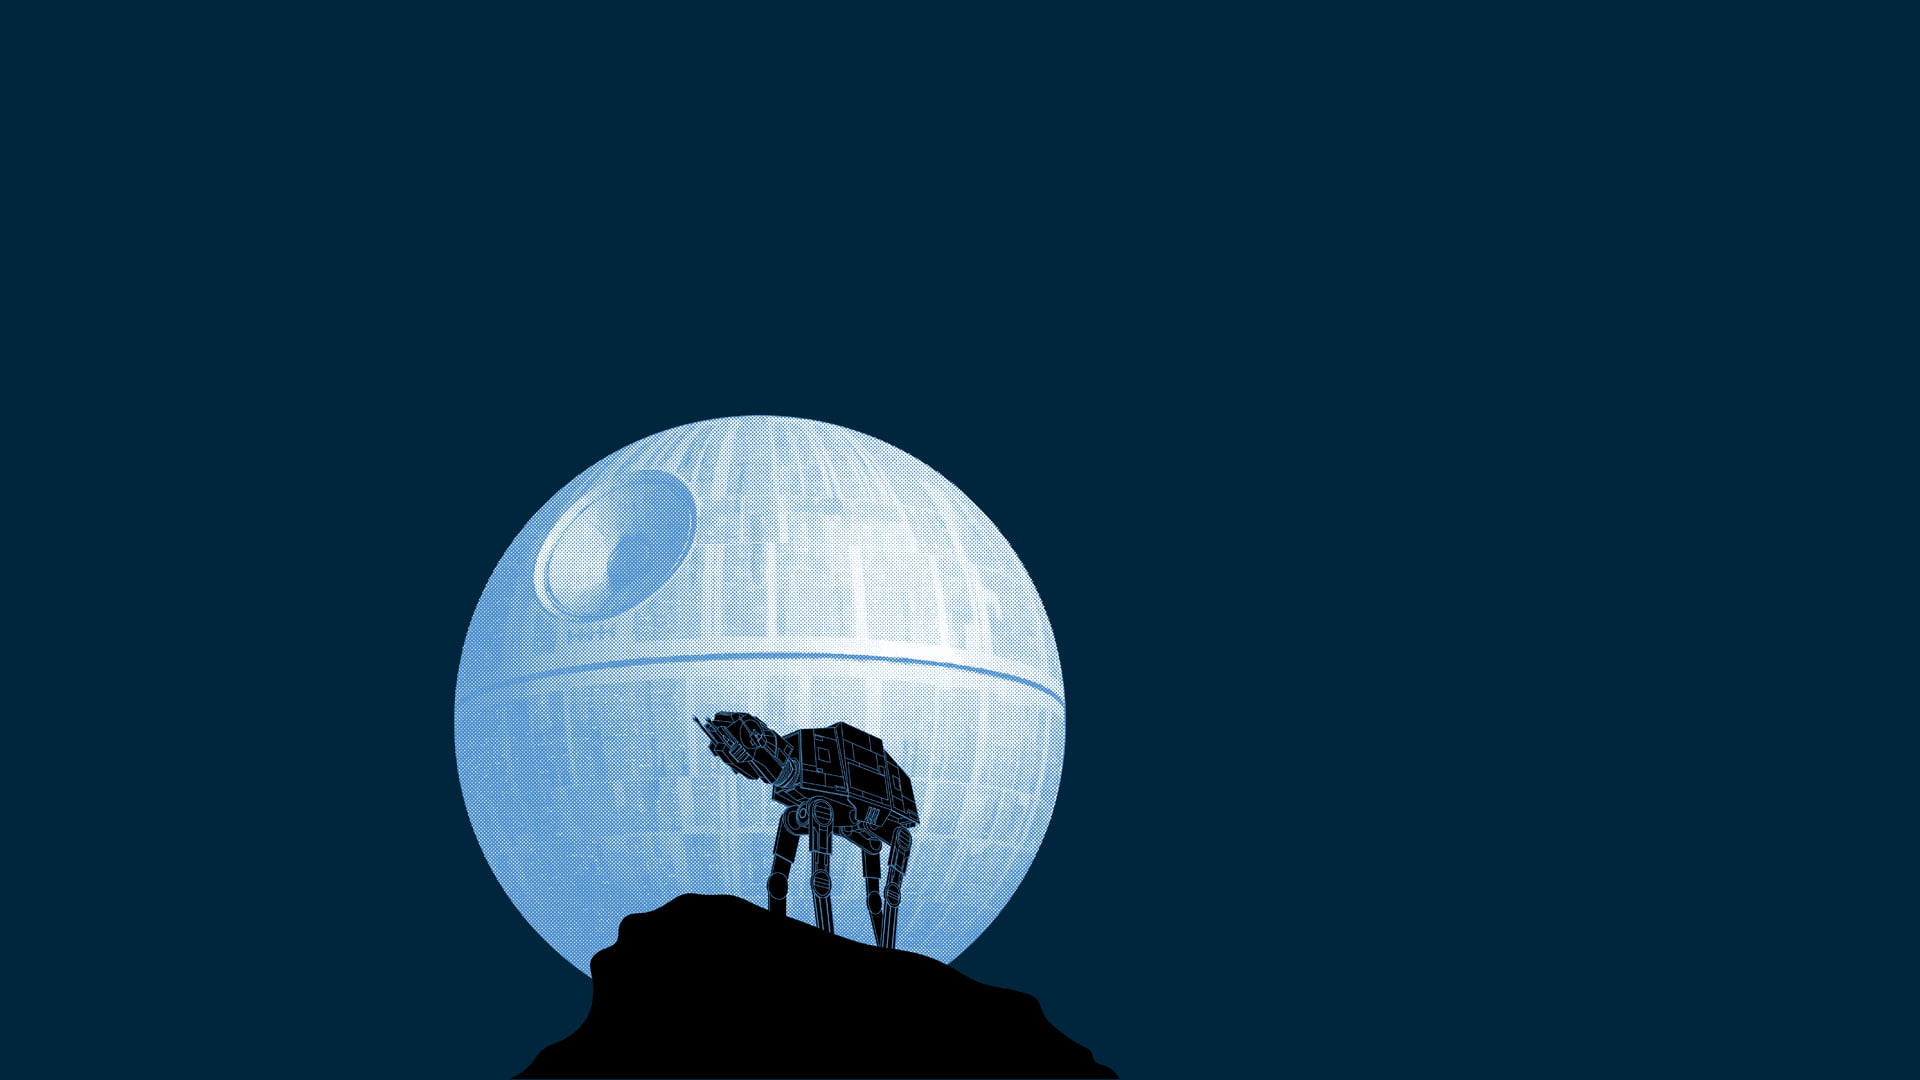 White And Blue Desk Fan Star Wars Humor Death Star At At Hd Wallpaper Wallpaper Flare